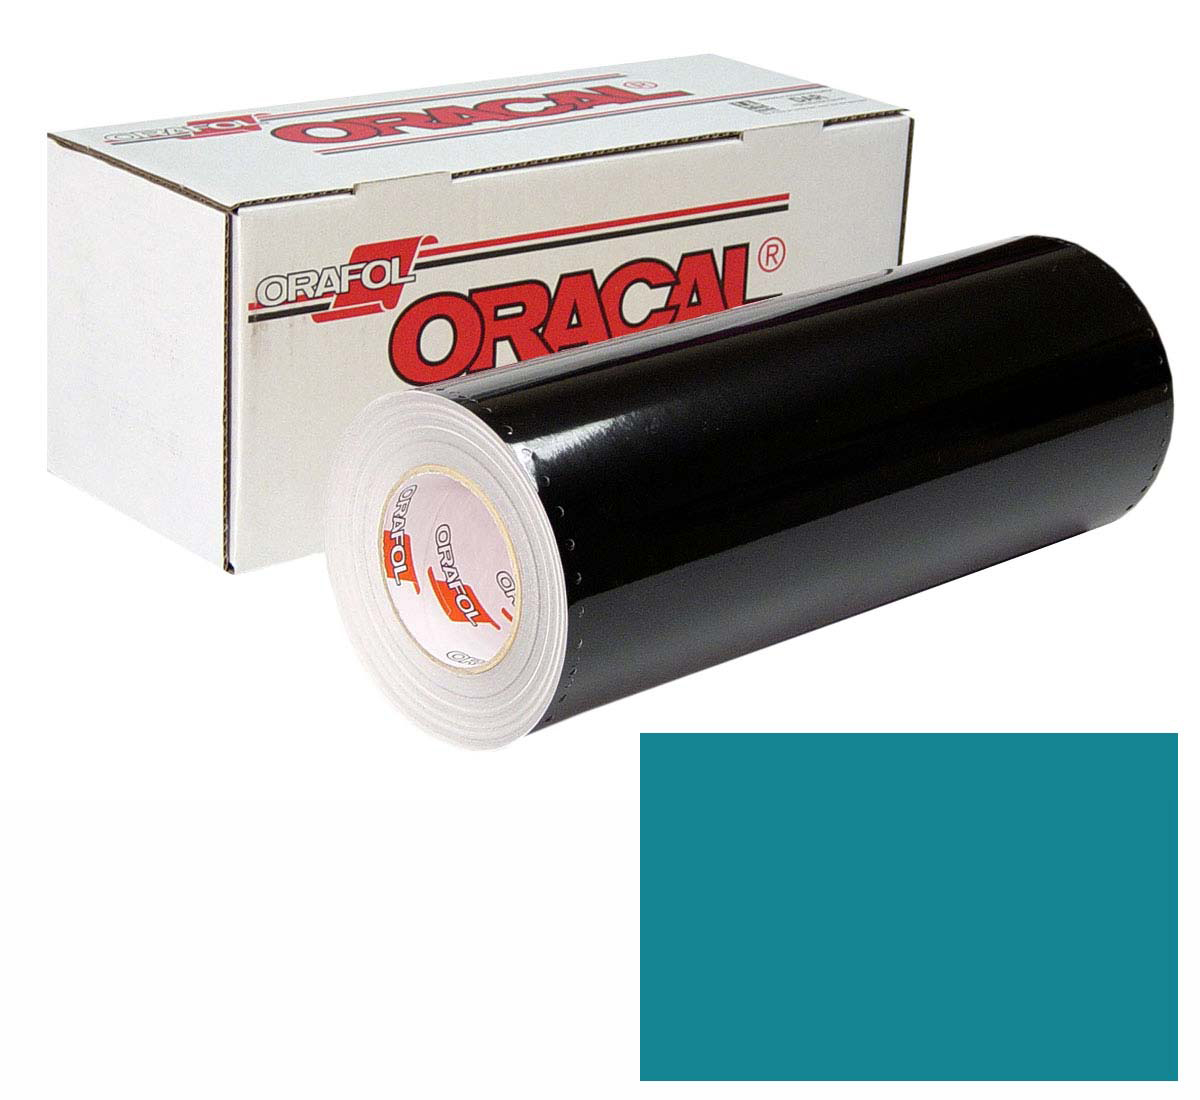 ORACAL 641 Unp 48in X 50yd 066 Turquoise Blue